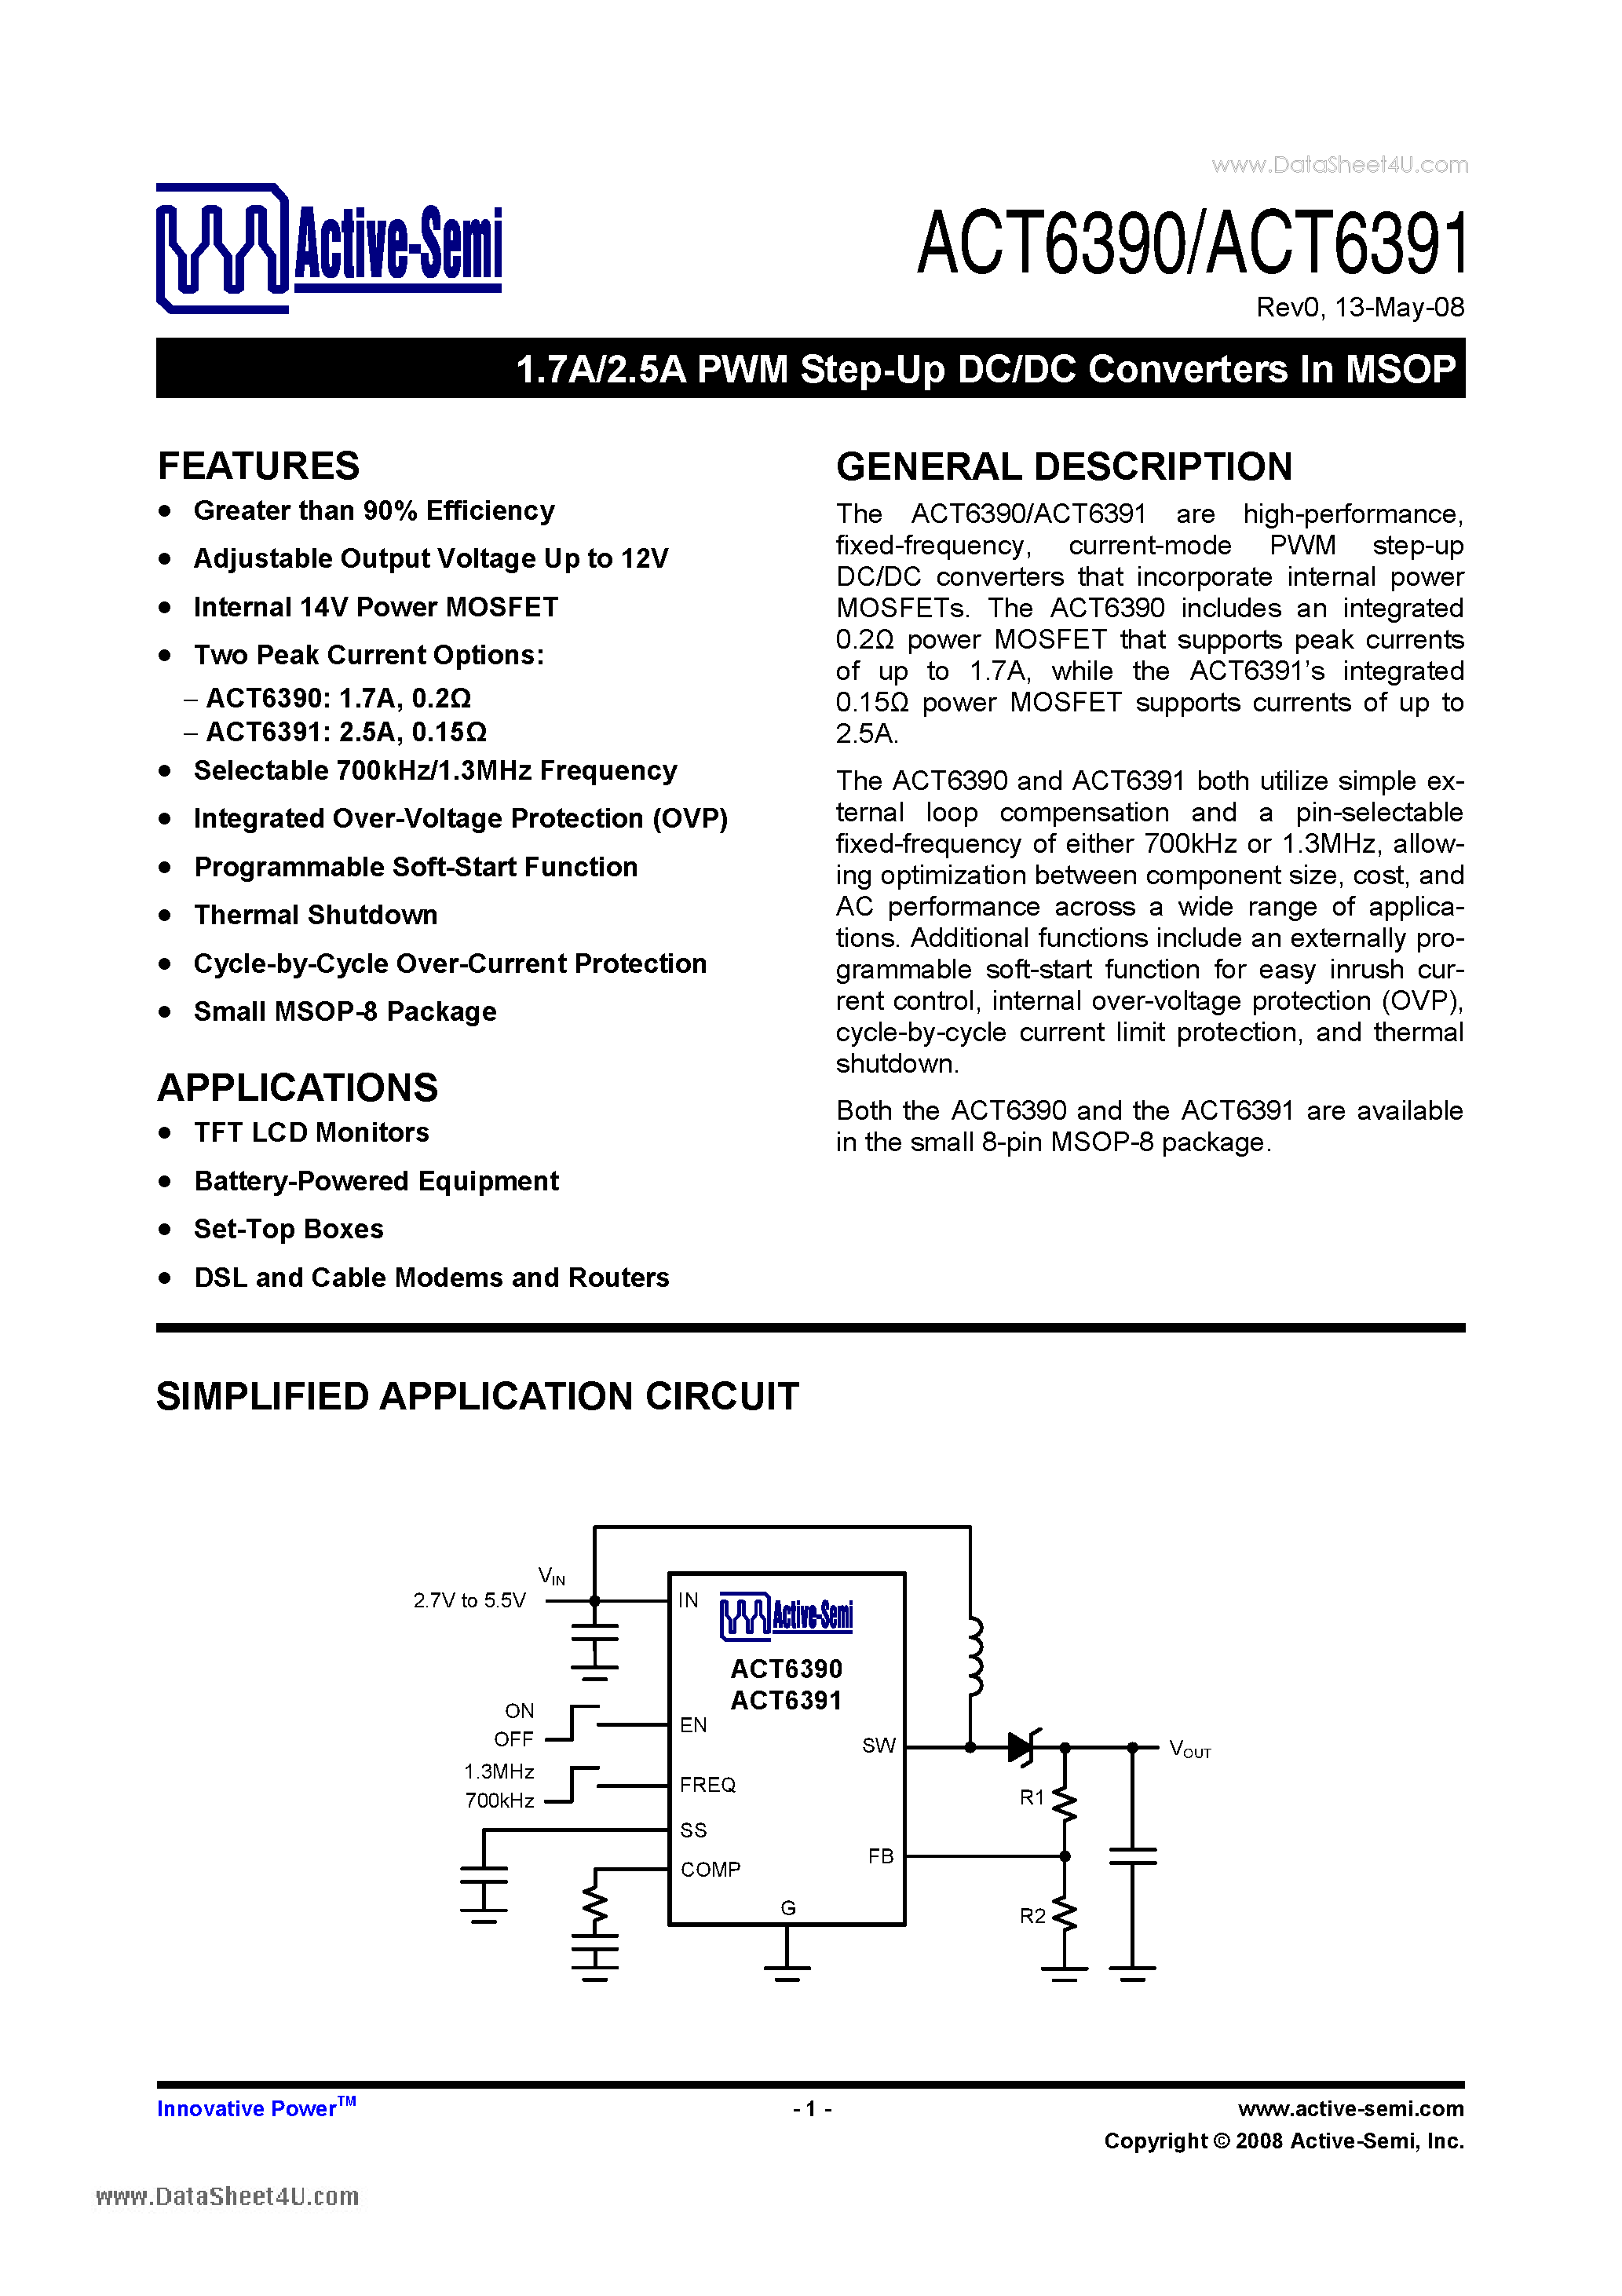 Datasheet ACT6390 - (ACT6390 / ACT6391) 1.7A/2.5A PWM Step-Up DC/DC Converters page 1